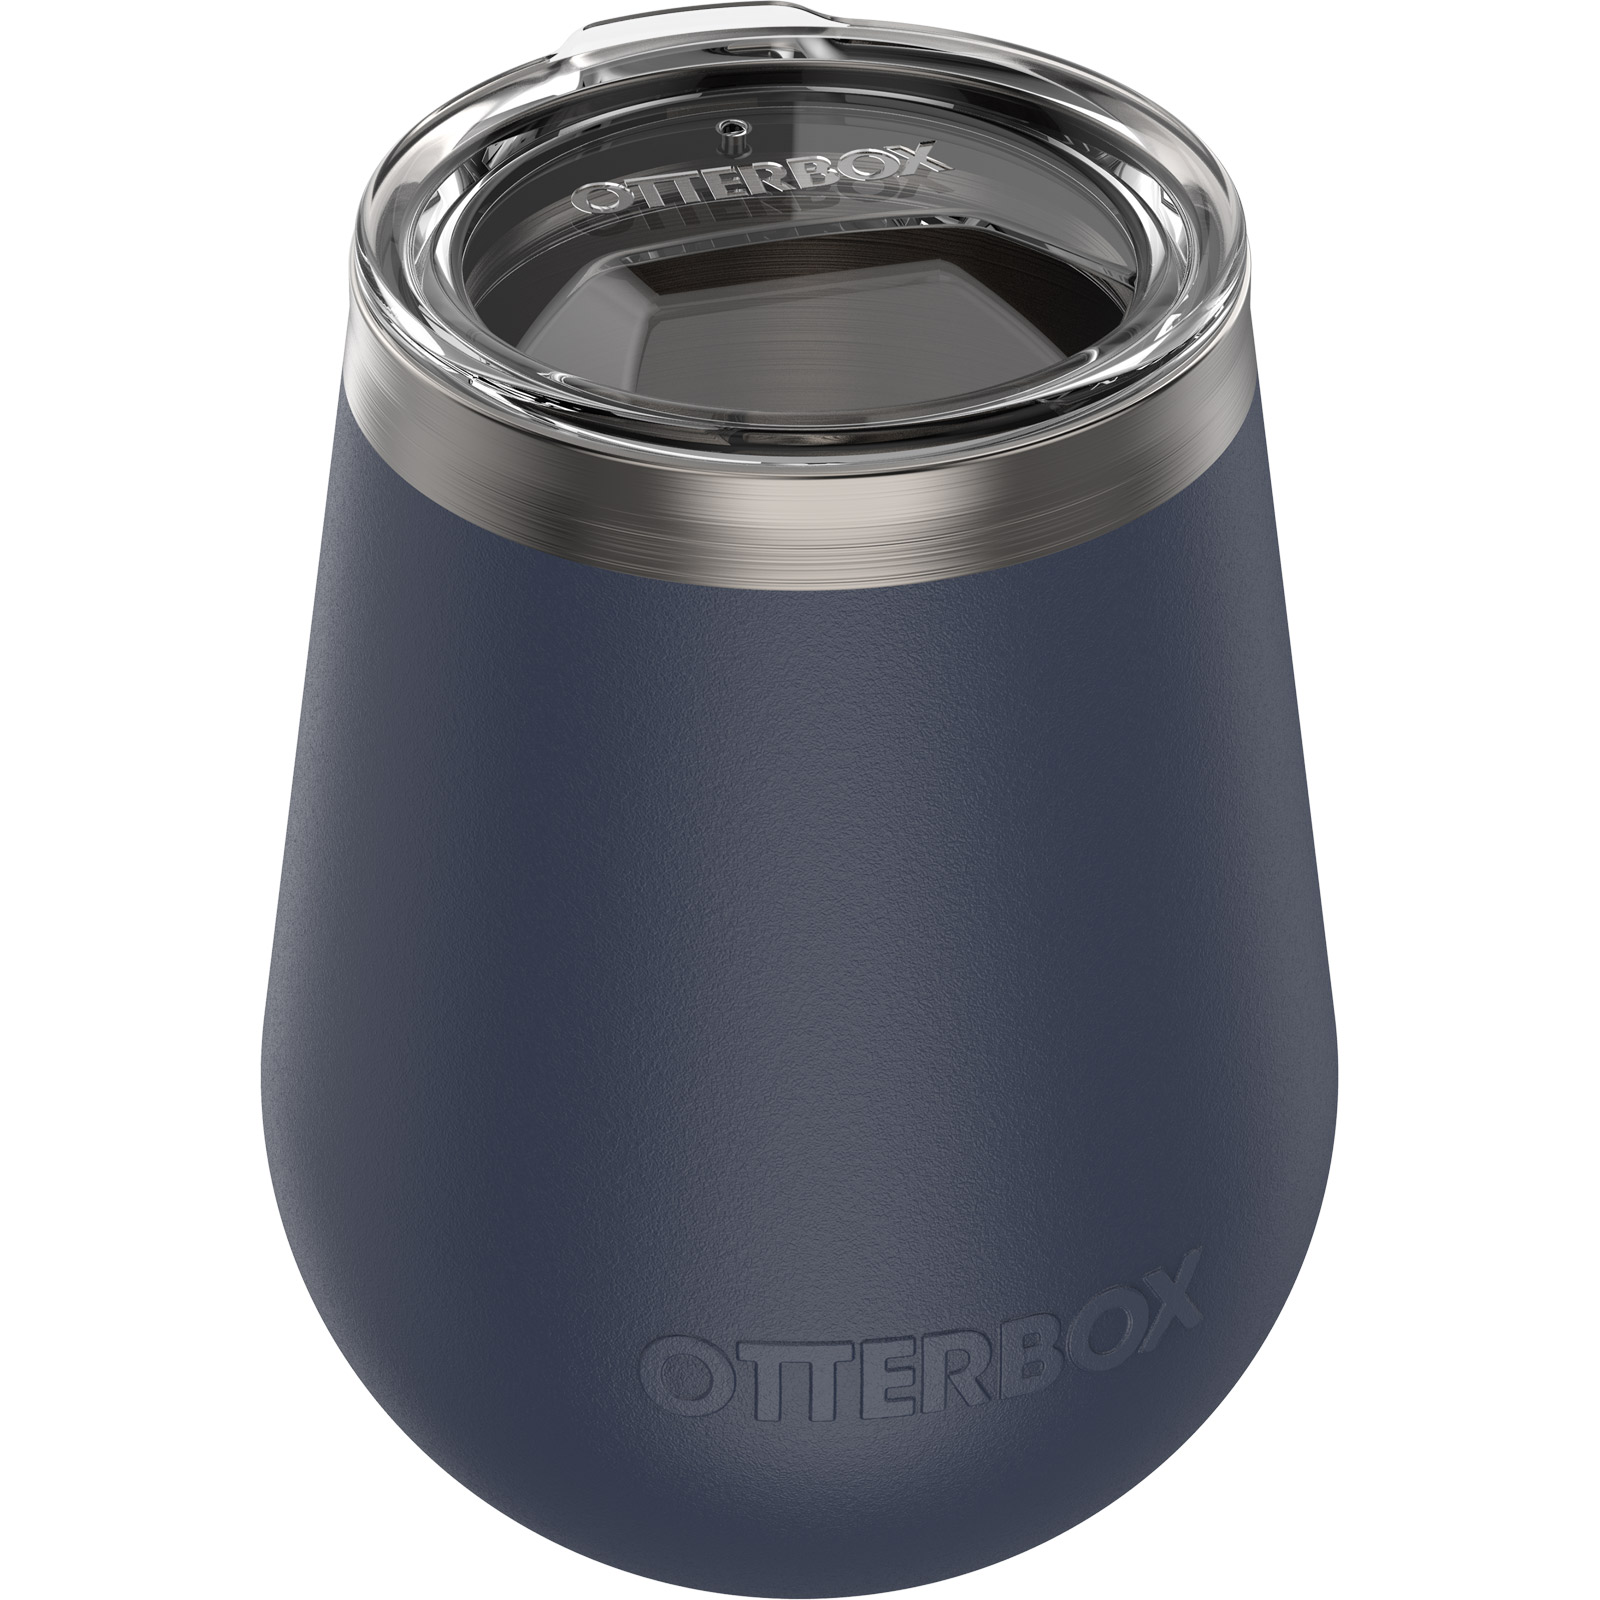 16 Oz. Otterbox® Elevation® Core Colors Stainless Steel Tumbler